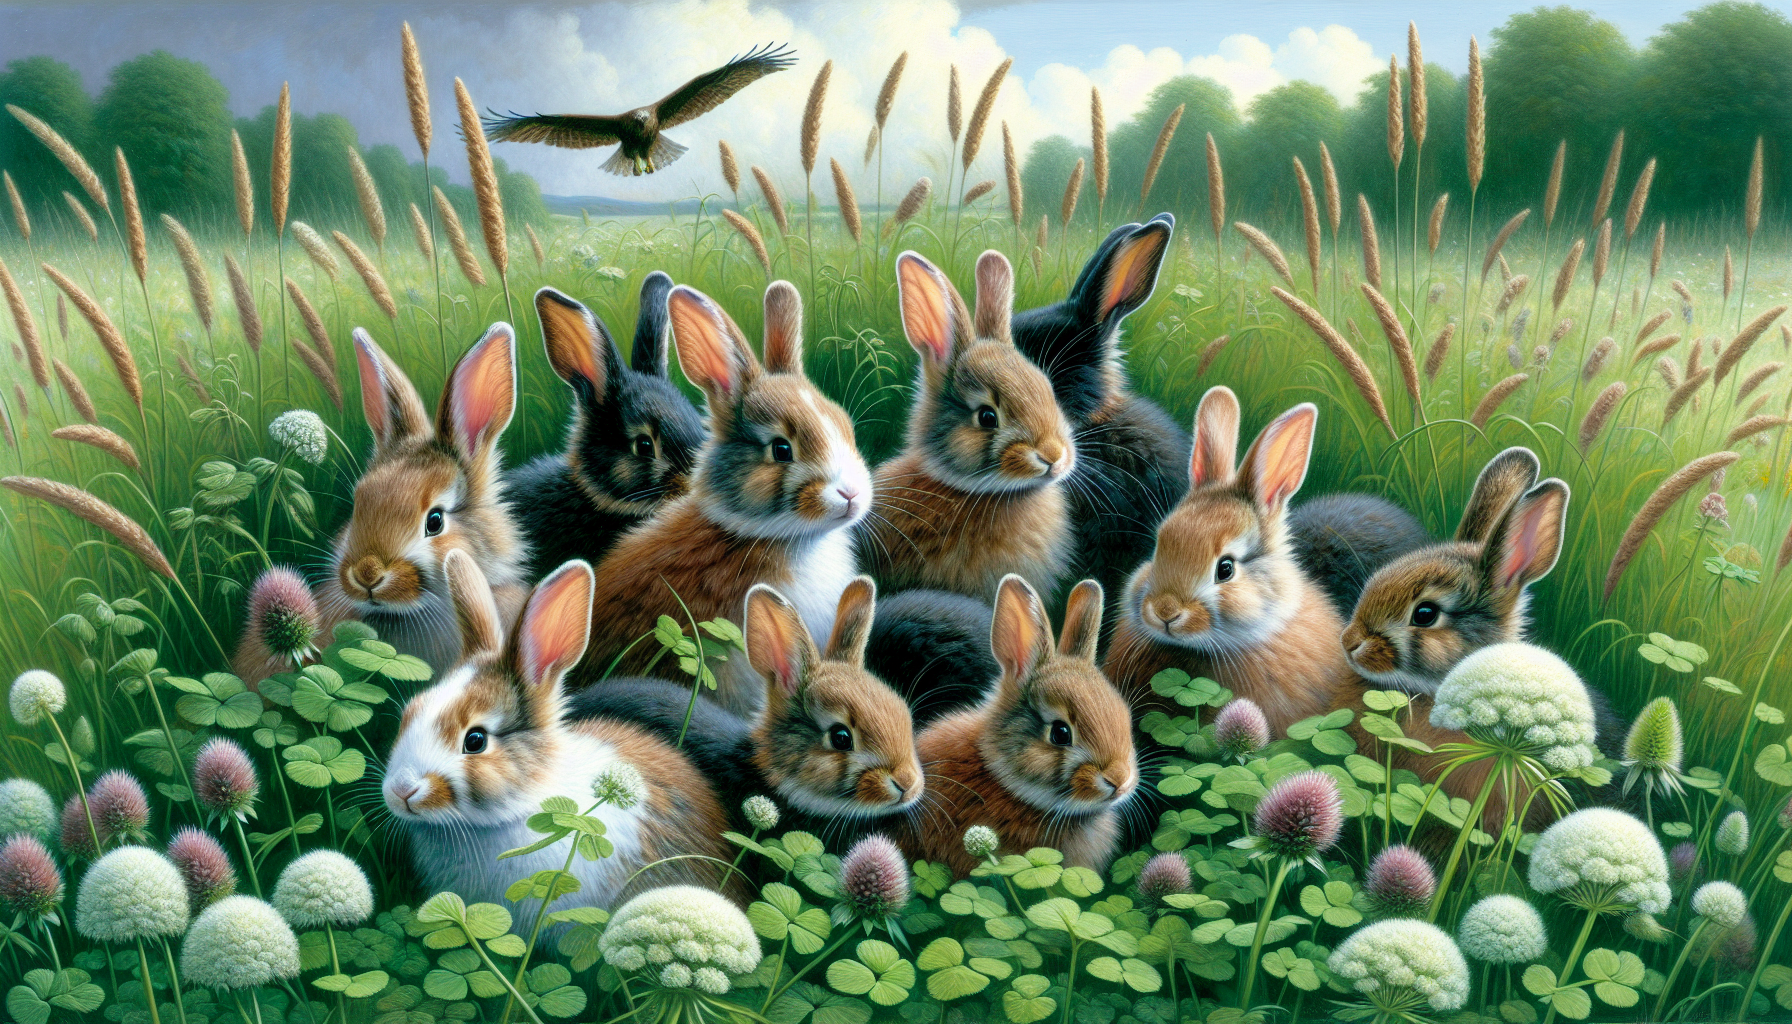 Illustration of a group of rabbits in a natural environment